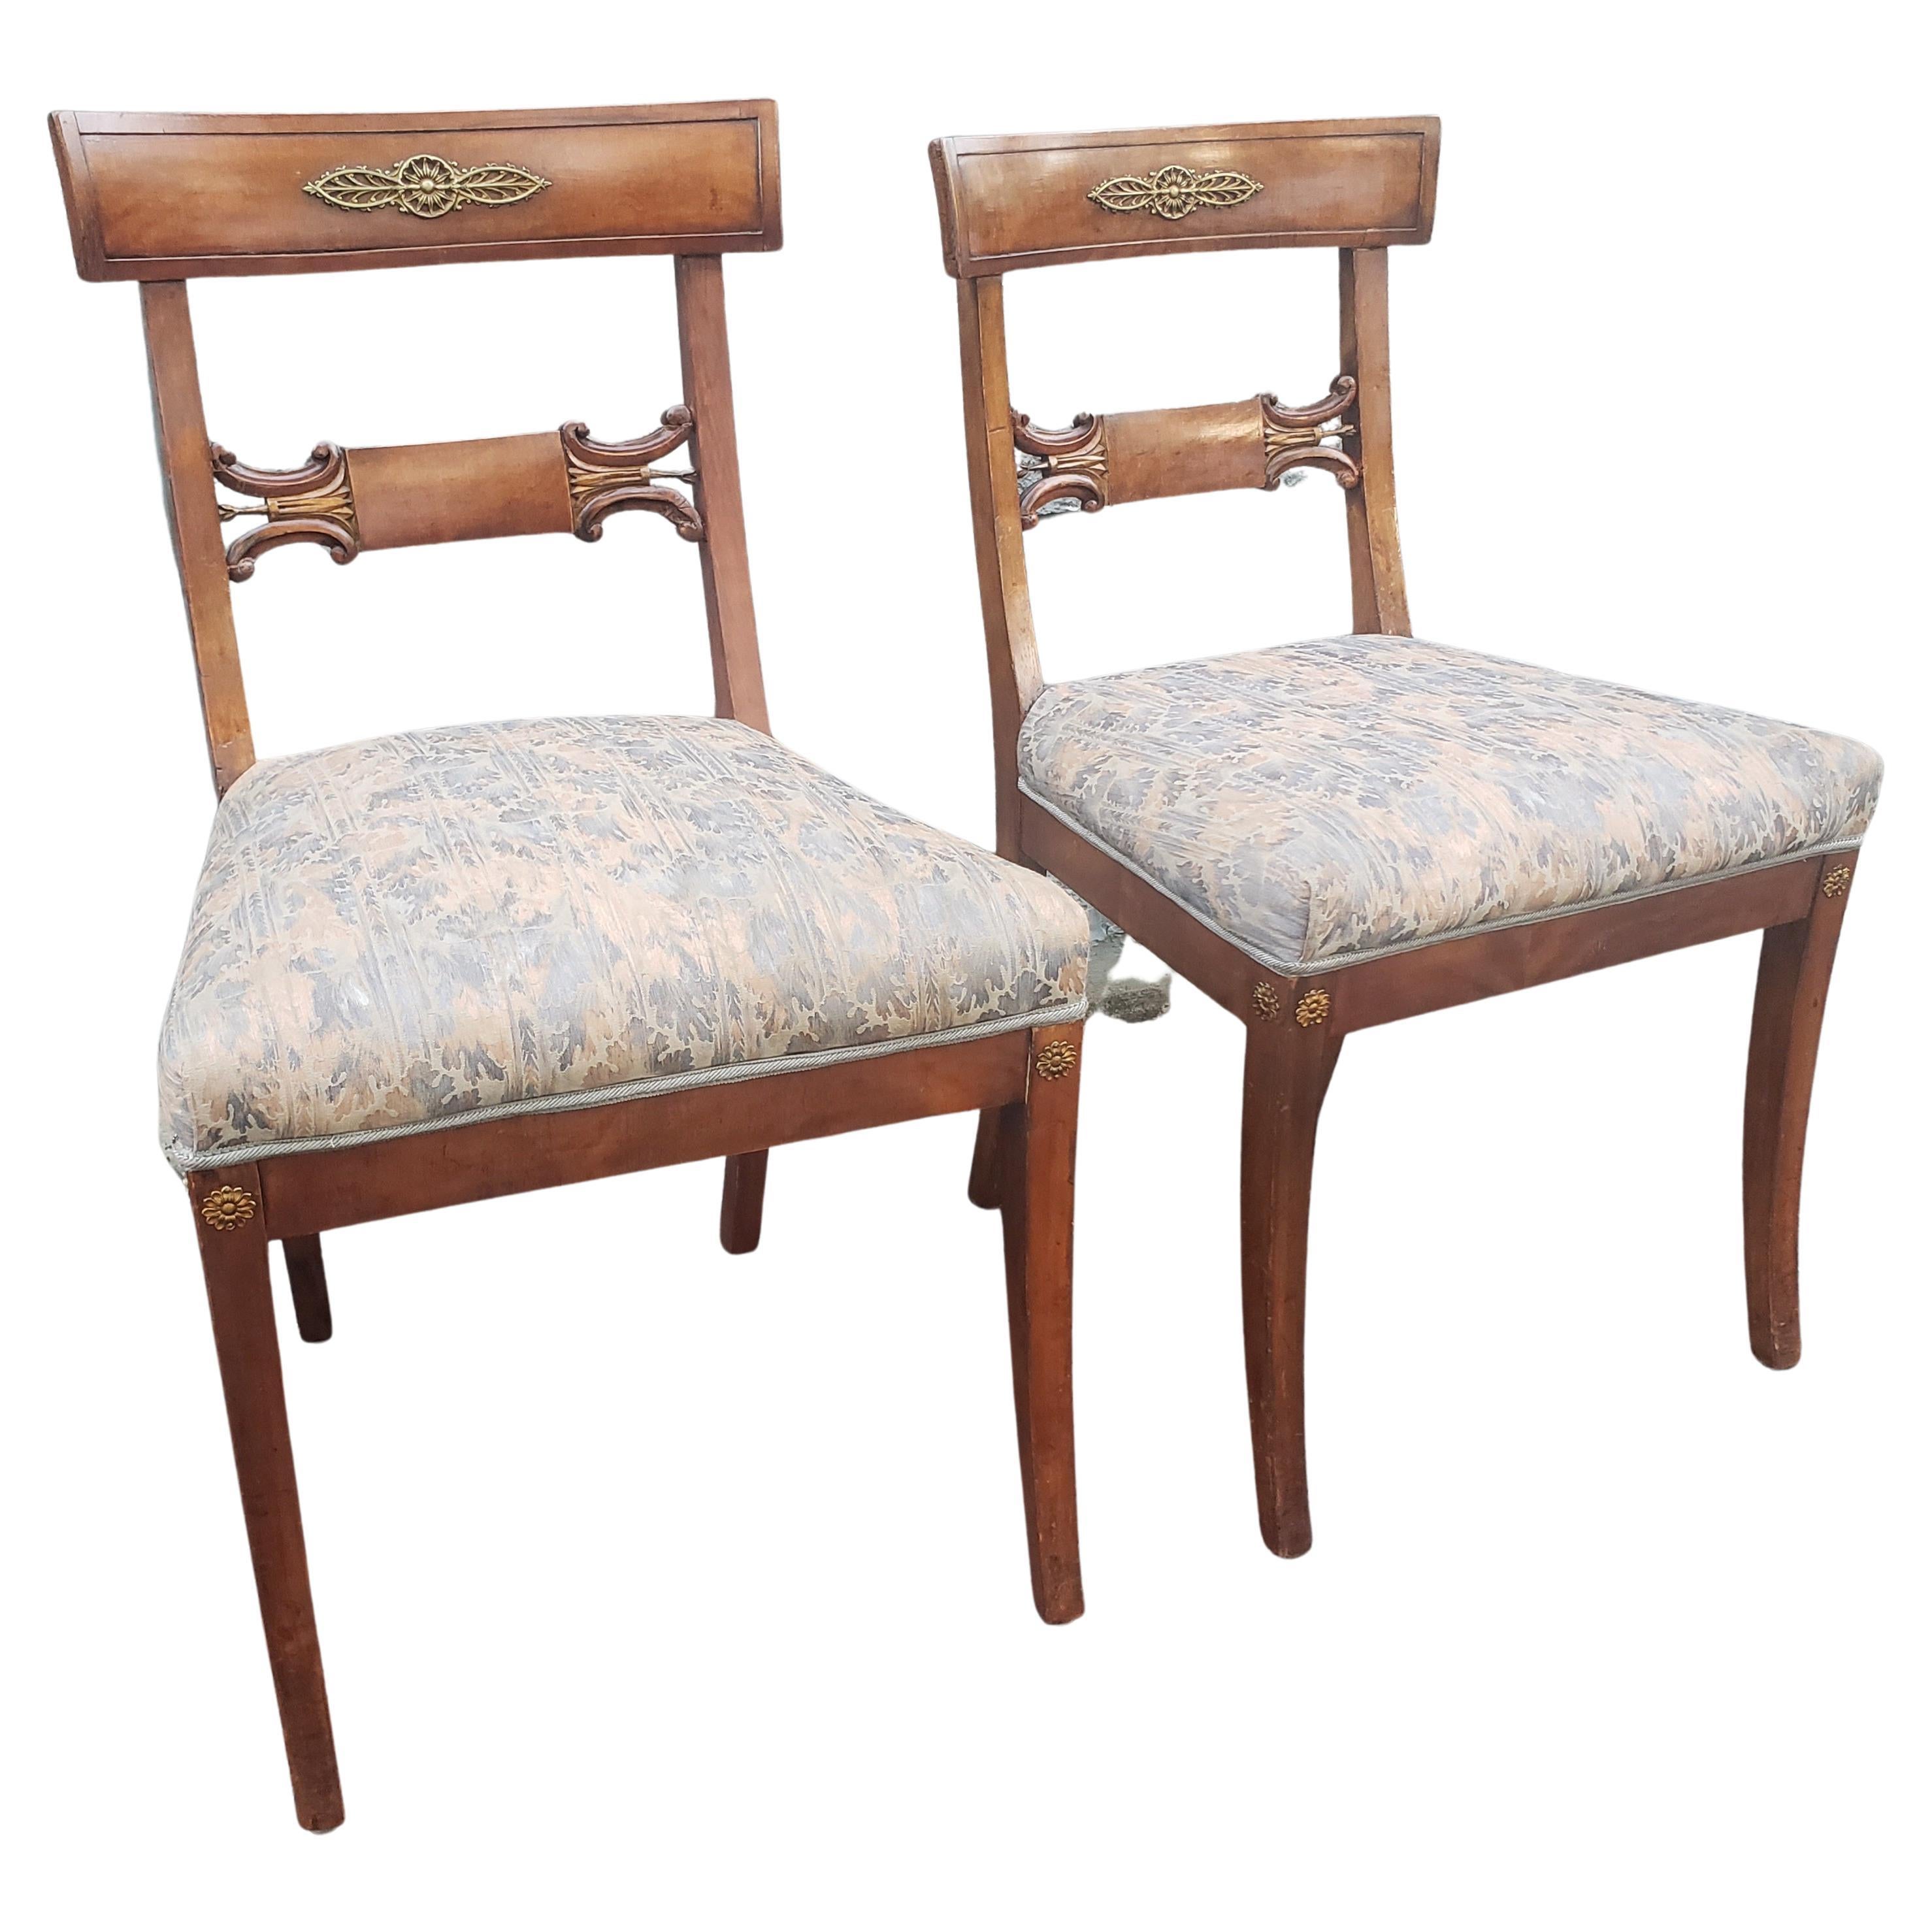 American Pair of 19th C Empire Ormolu Mounted, Partial Gilt Mahogany & Upholstered Chairs For Sale